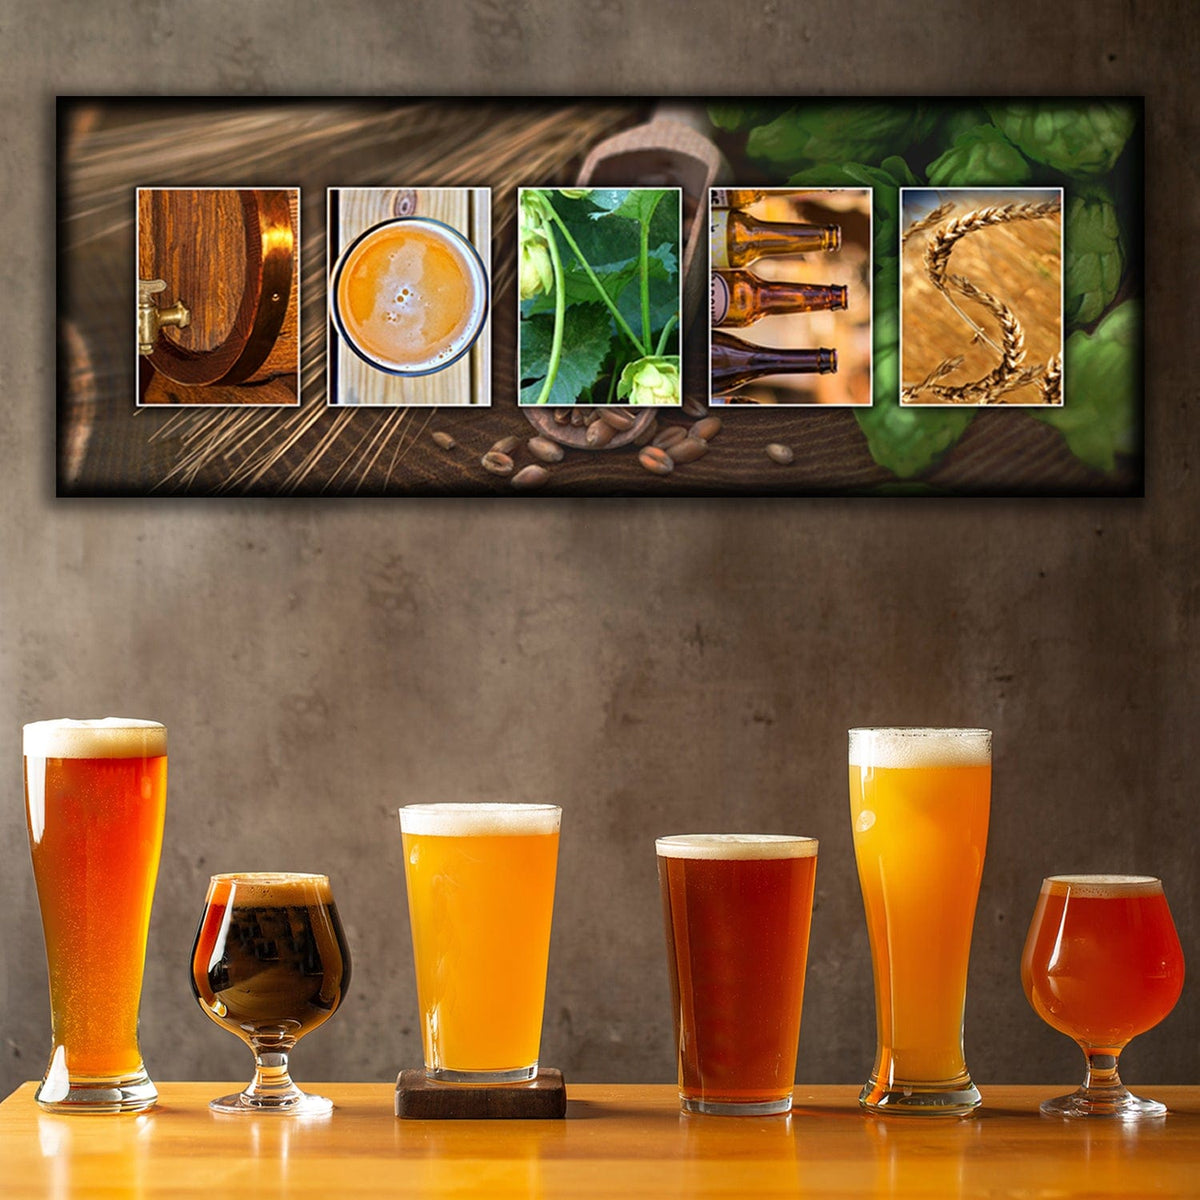 The perfect personalized gift for the beer lover. Beer decor from Personal Prints